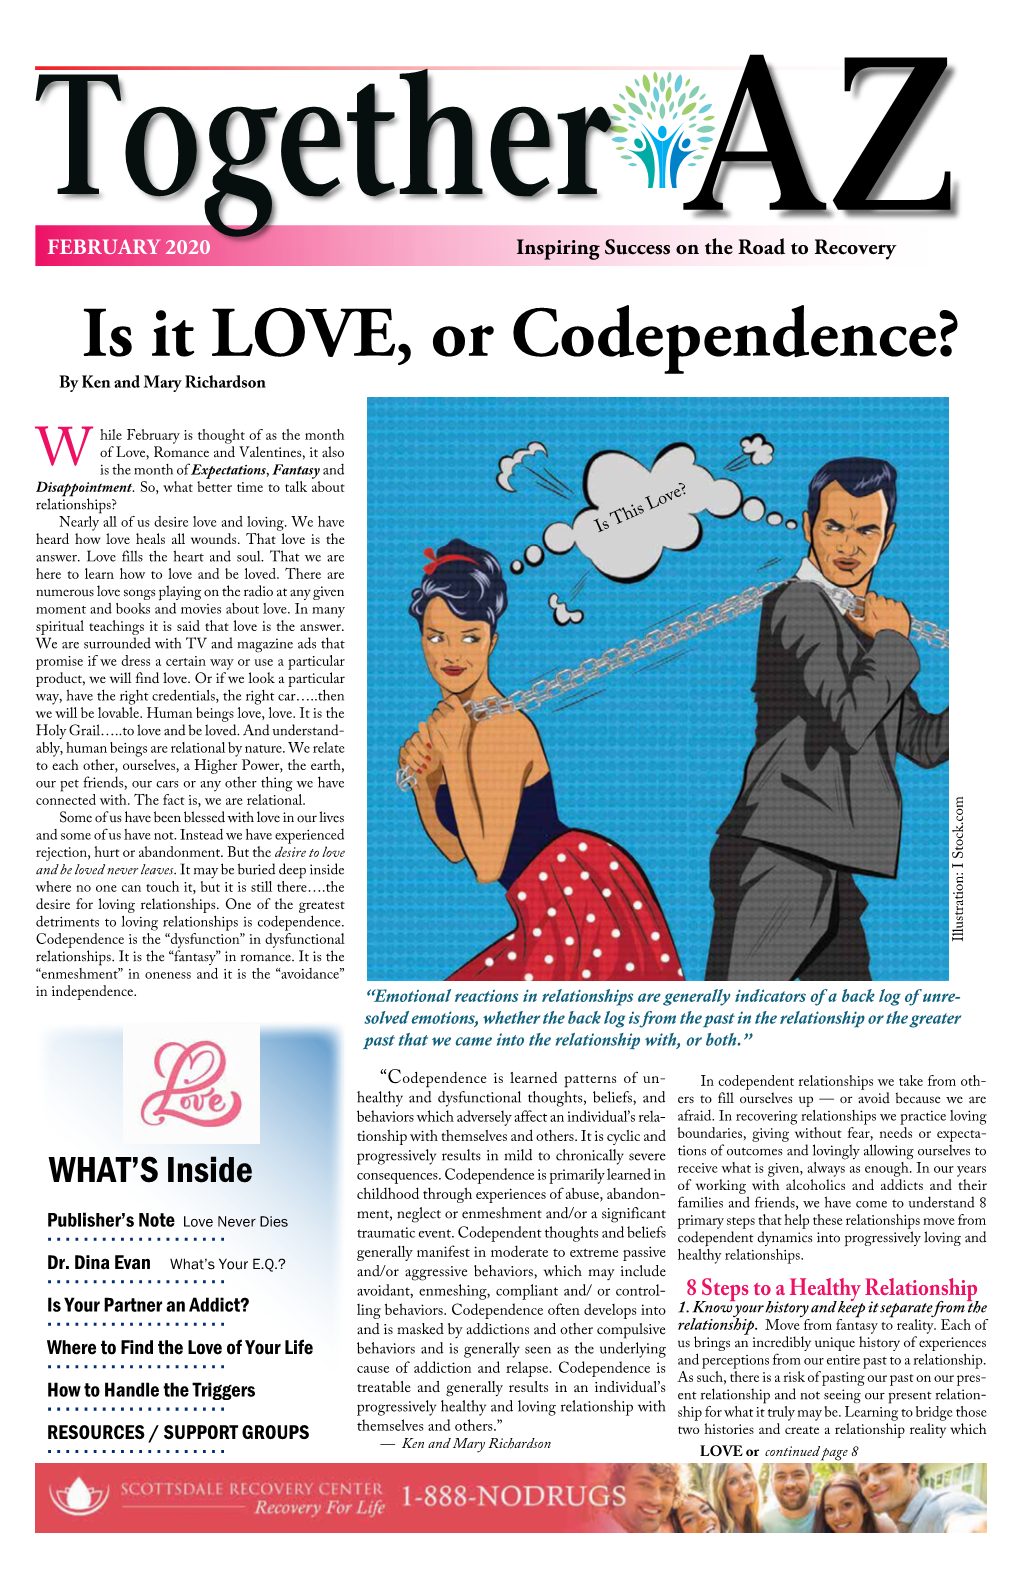 Is It LOVE, Or Codependence? by Ken and Mary Richardson